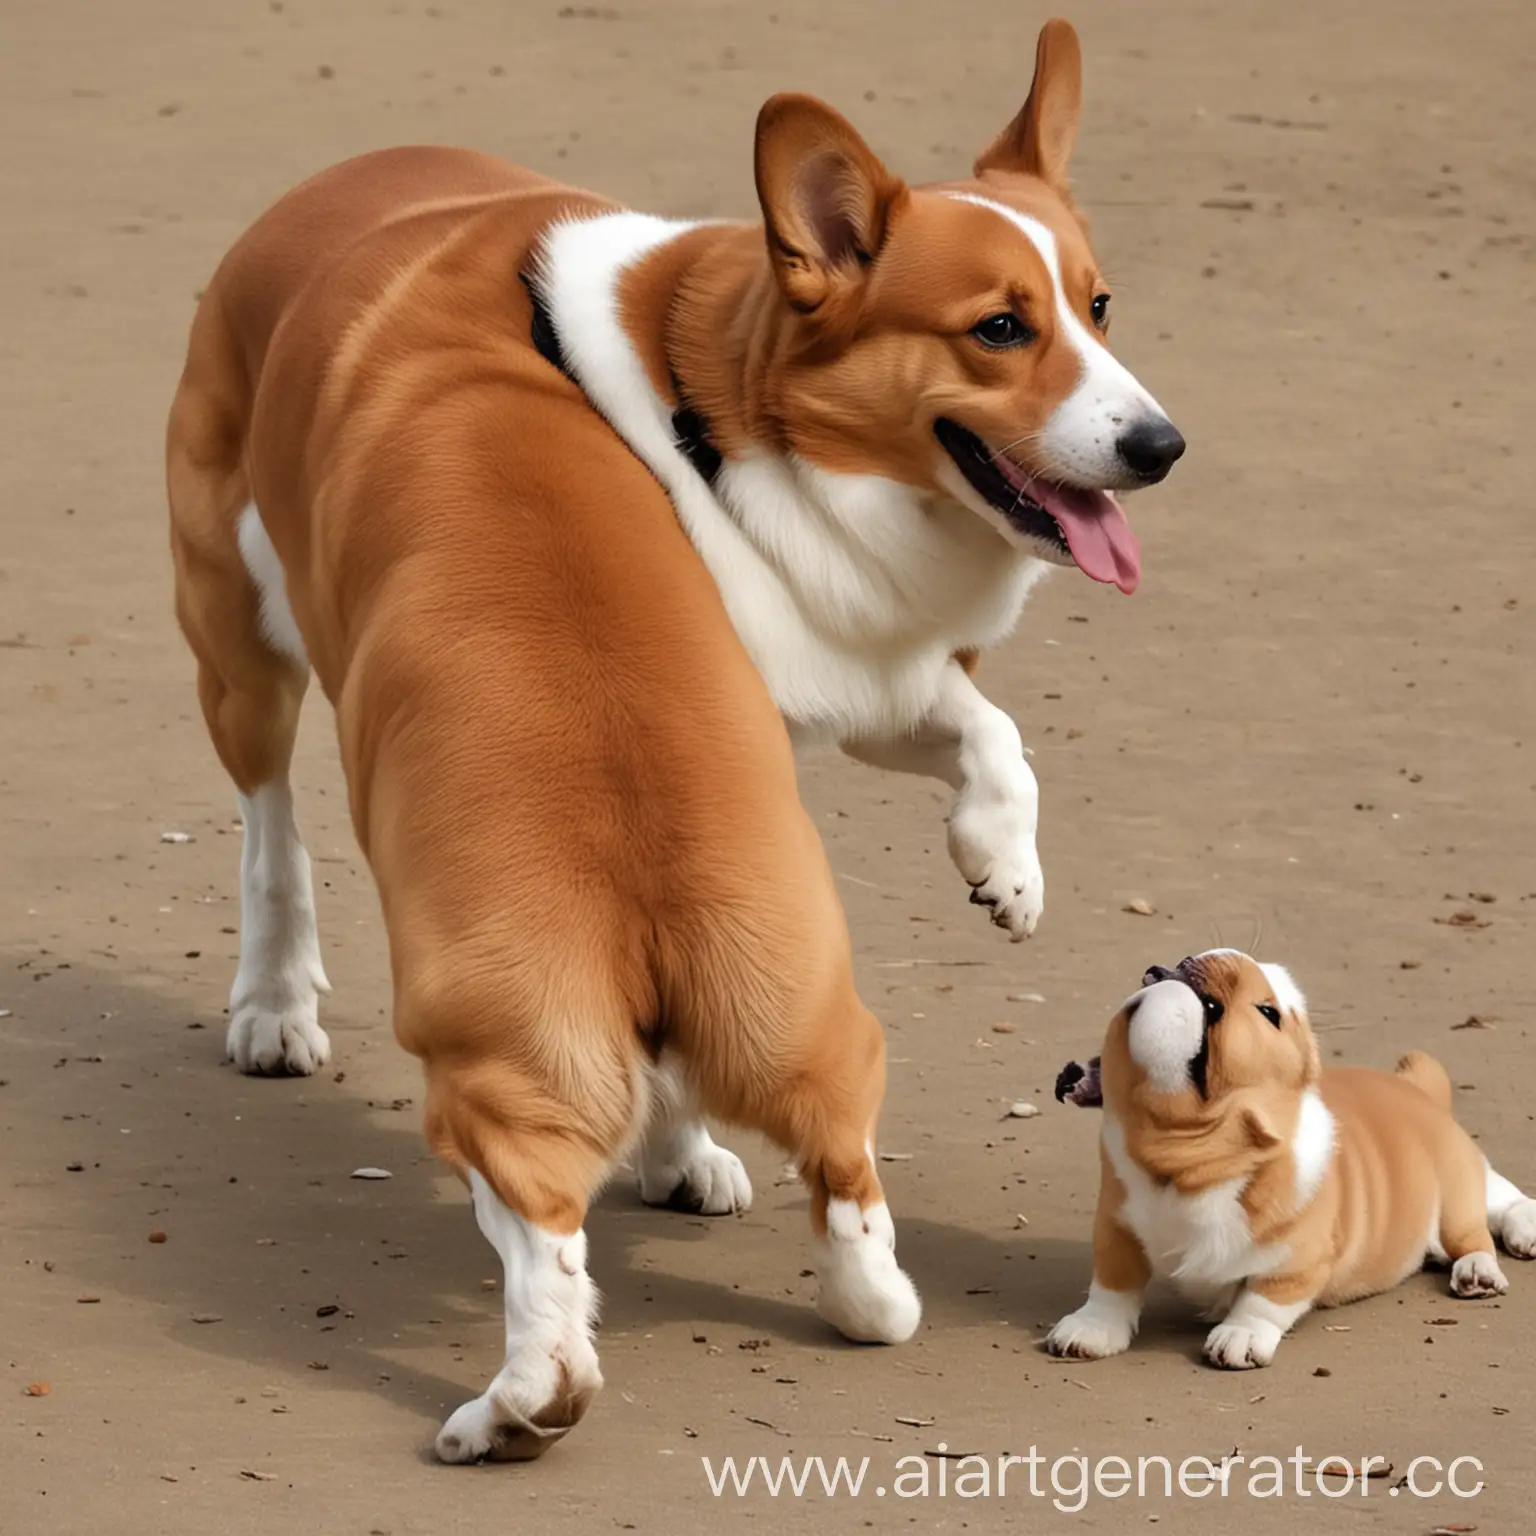 Playful-Dog-Engages-with-Welsh-Corgis-Rear-End